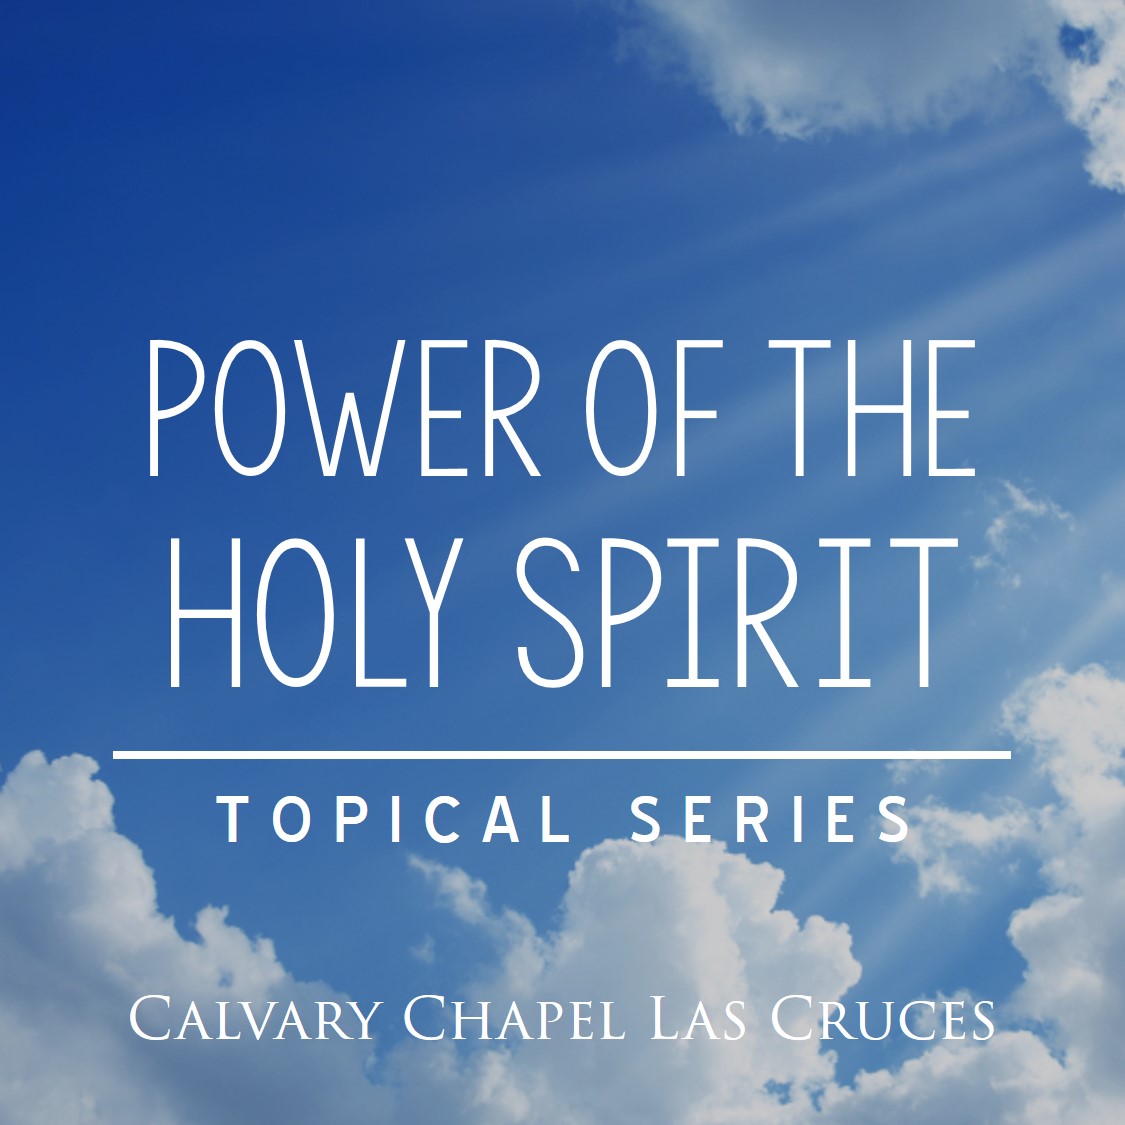 The Power of the Holy Spirit, Part 13